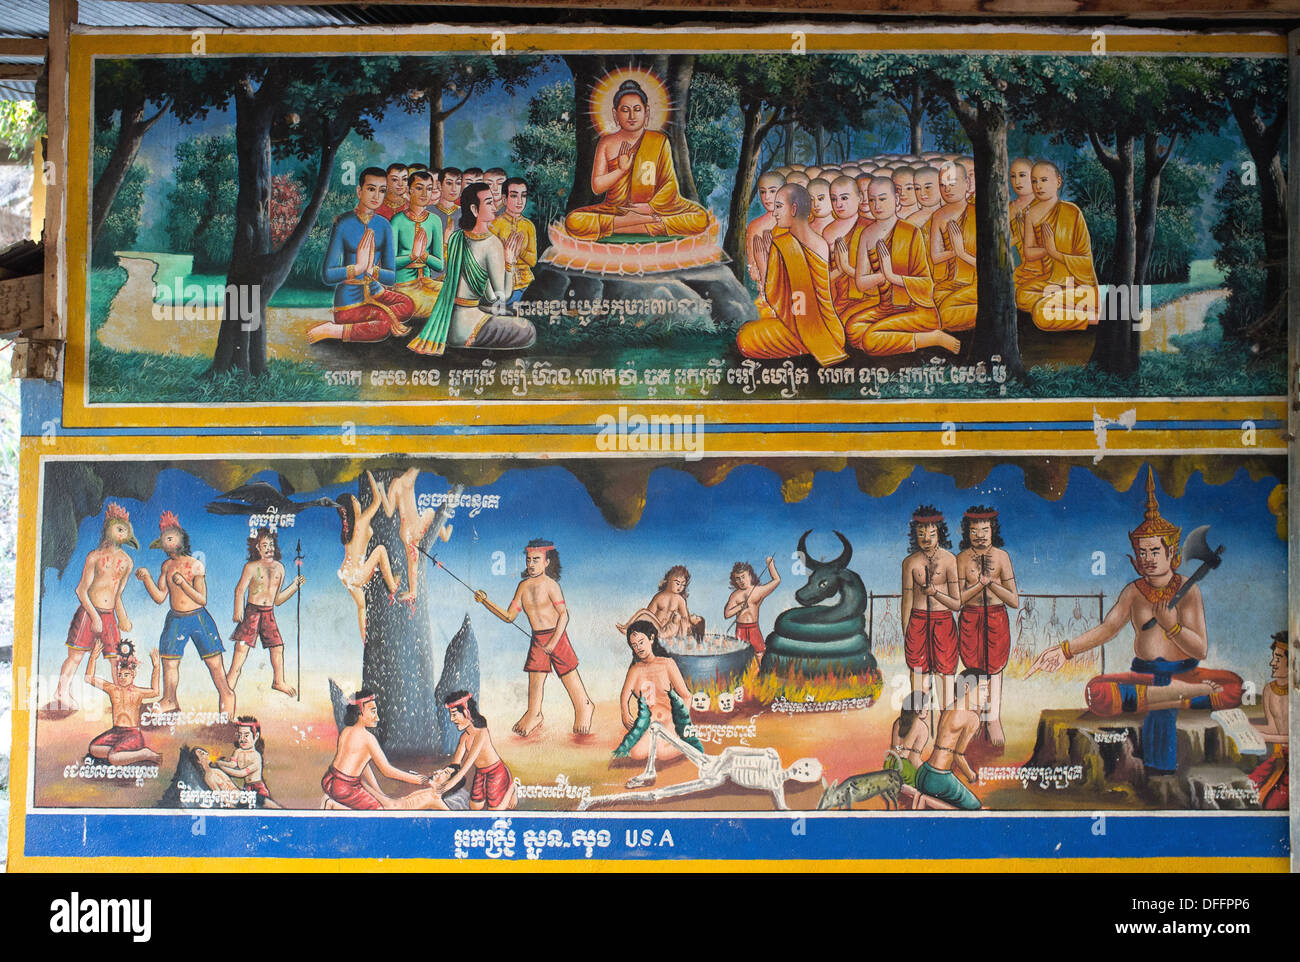 Wall paintings at a temple in Cambodia, depicting Buddhist Hell (below) and the Buddha preaching to his disciples (above). Stock Photo